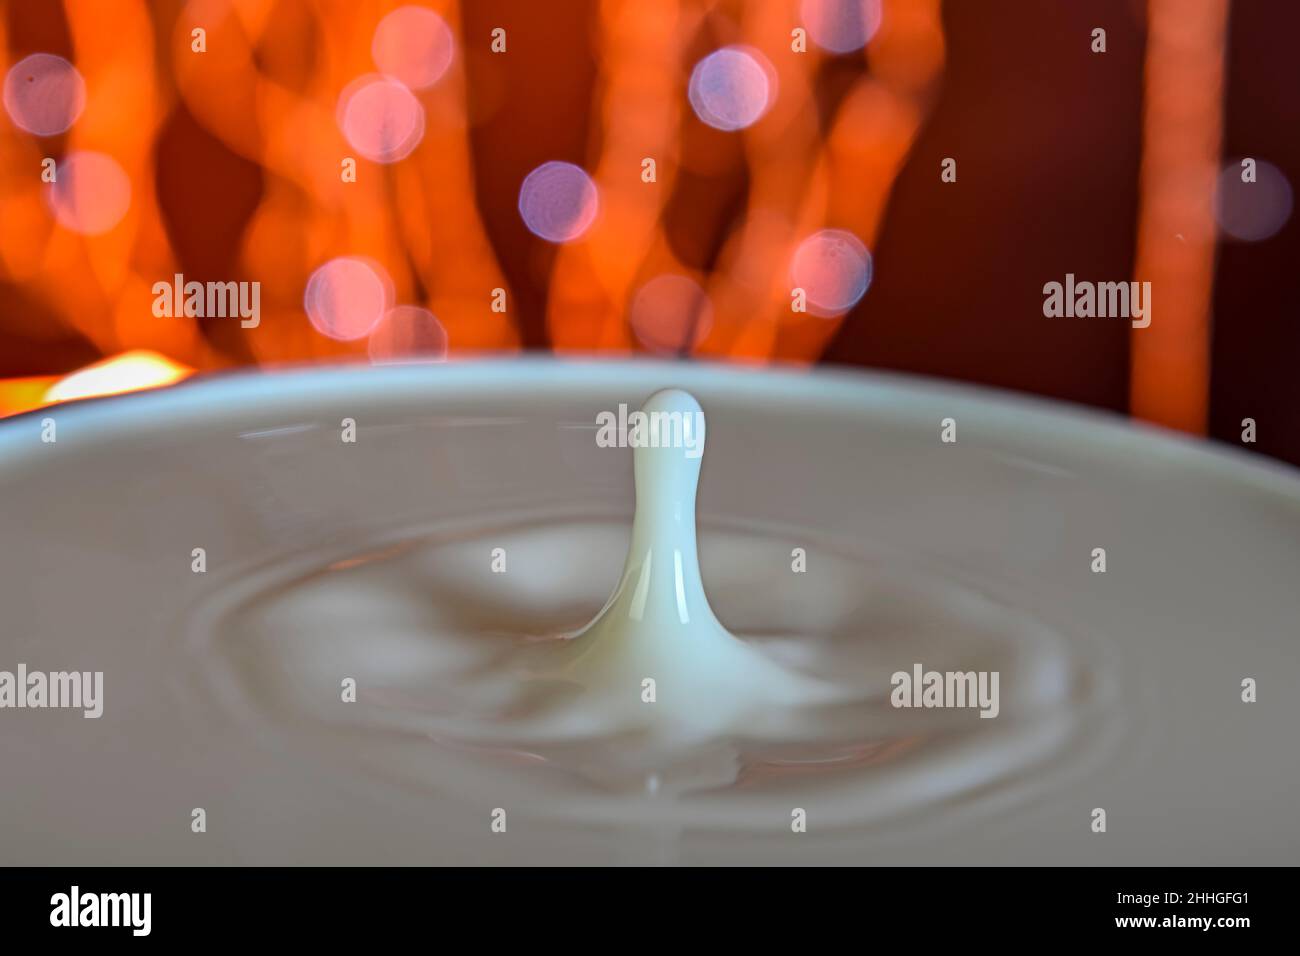 Drops falling on a container, with a bokeh background. Stock Photo